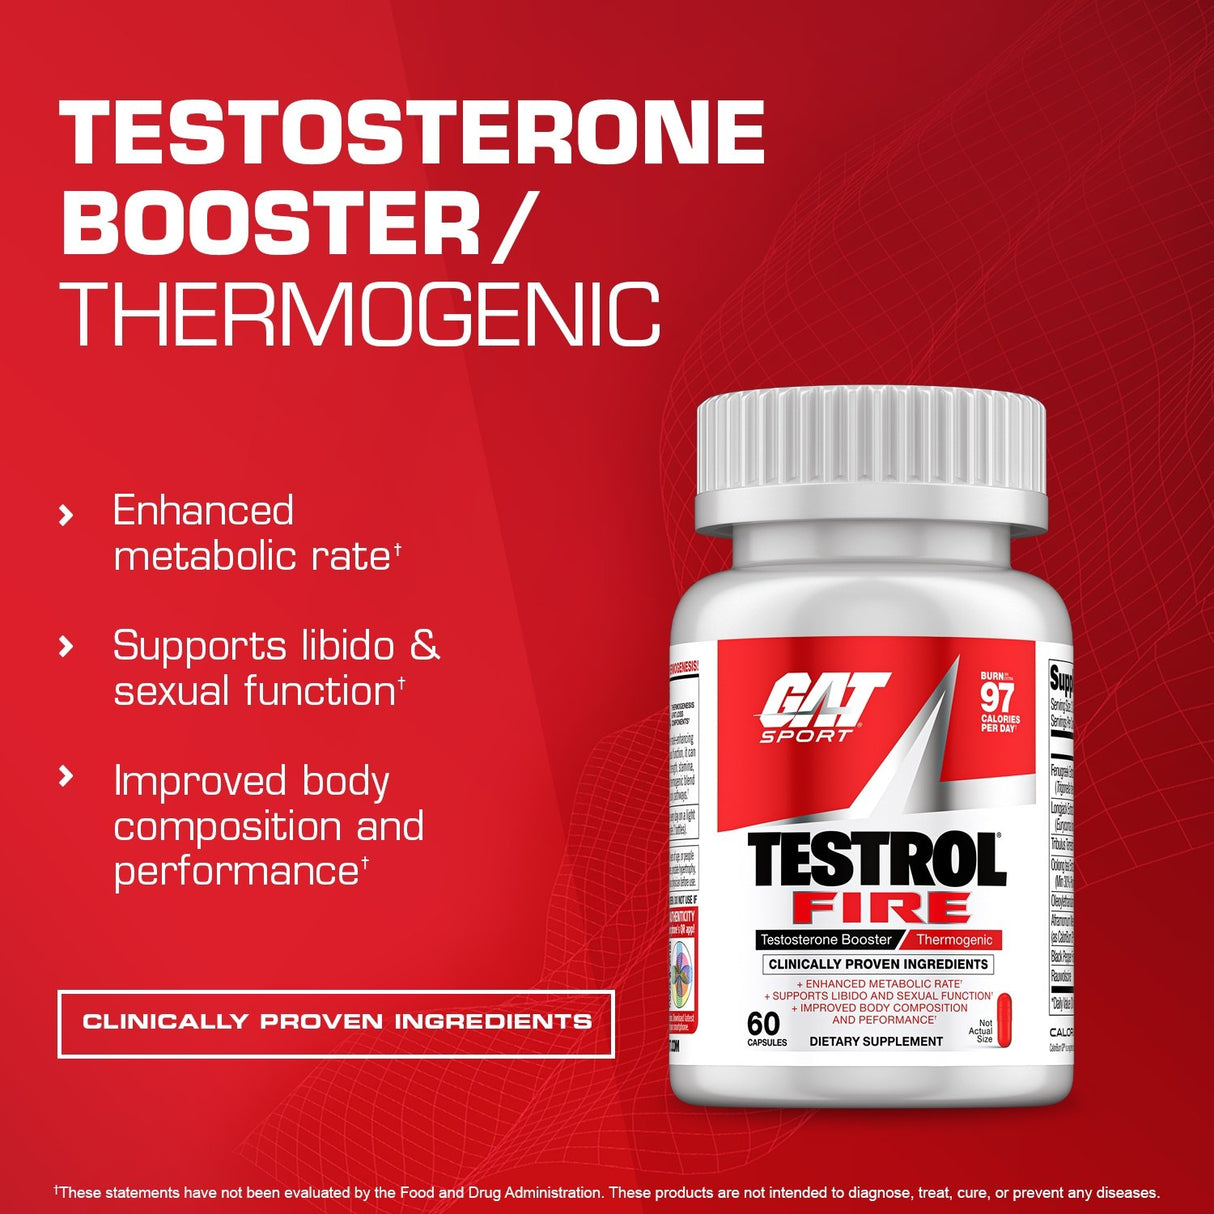 GAT SPORT Testrol Fire - testosterone booster and thermogenic formula